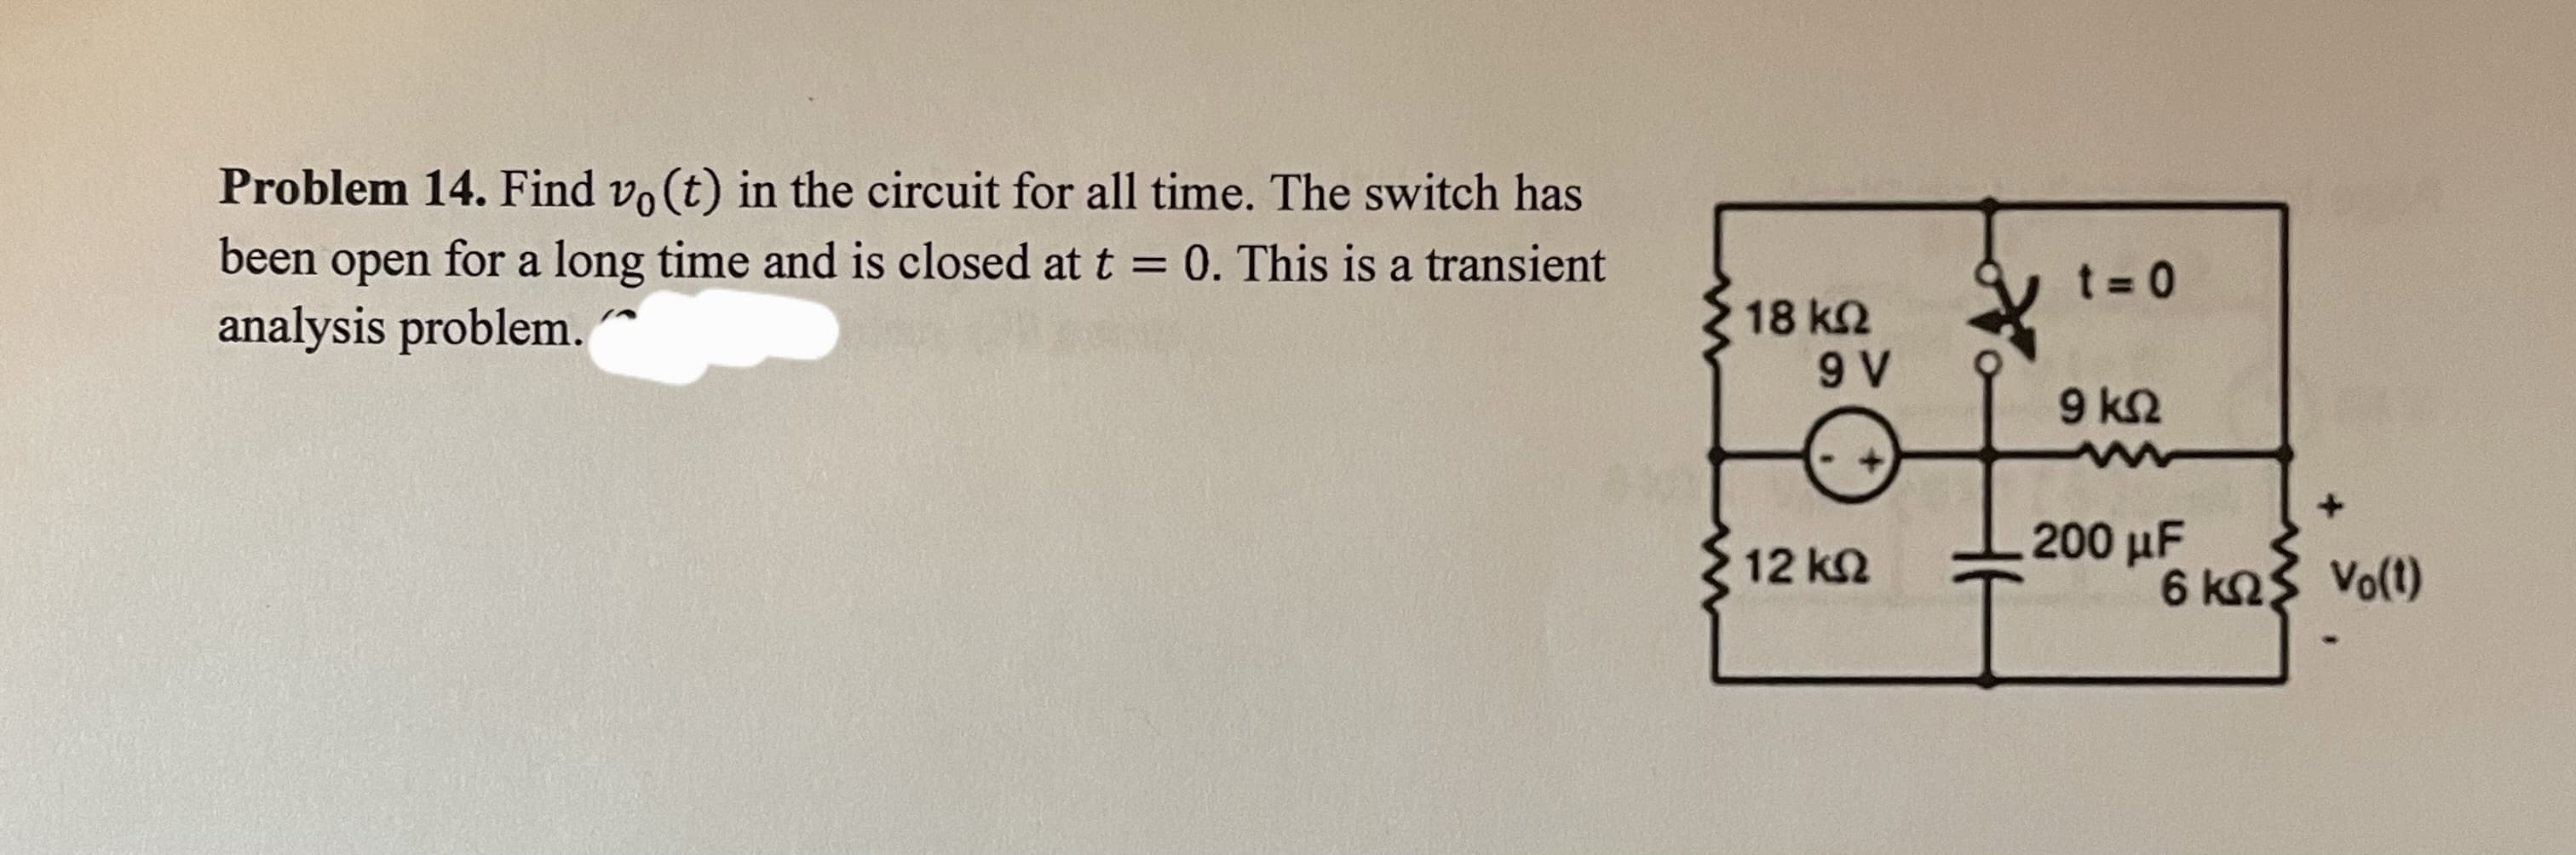 Problem 14. Find vo(t) in the circuit for all time. The switch has
been open for a long time and is closed at t = 0. This is a transient
analysis problem.
18 ΚΩ
9 V
12 ΚΩ
ने
t=0
9 ΚΩ
200 µF
6 kn Vo(t)
ΚΩ